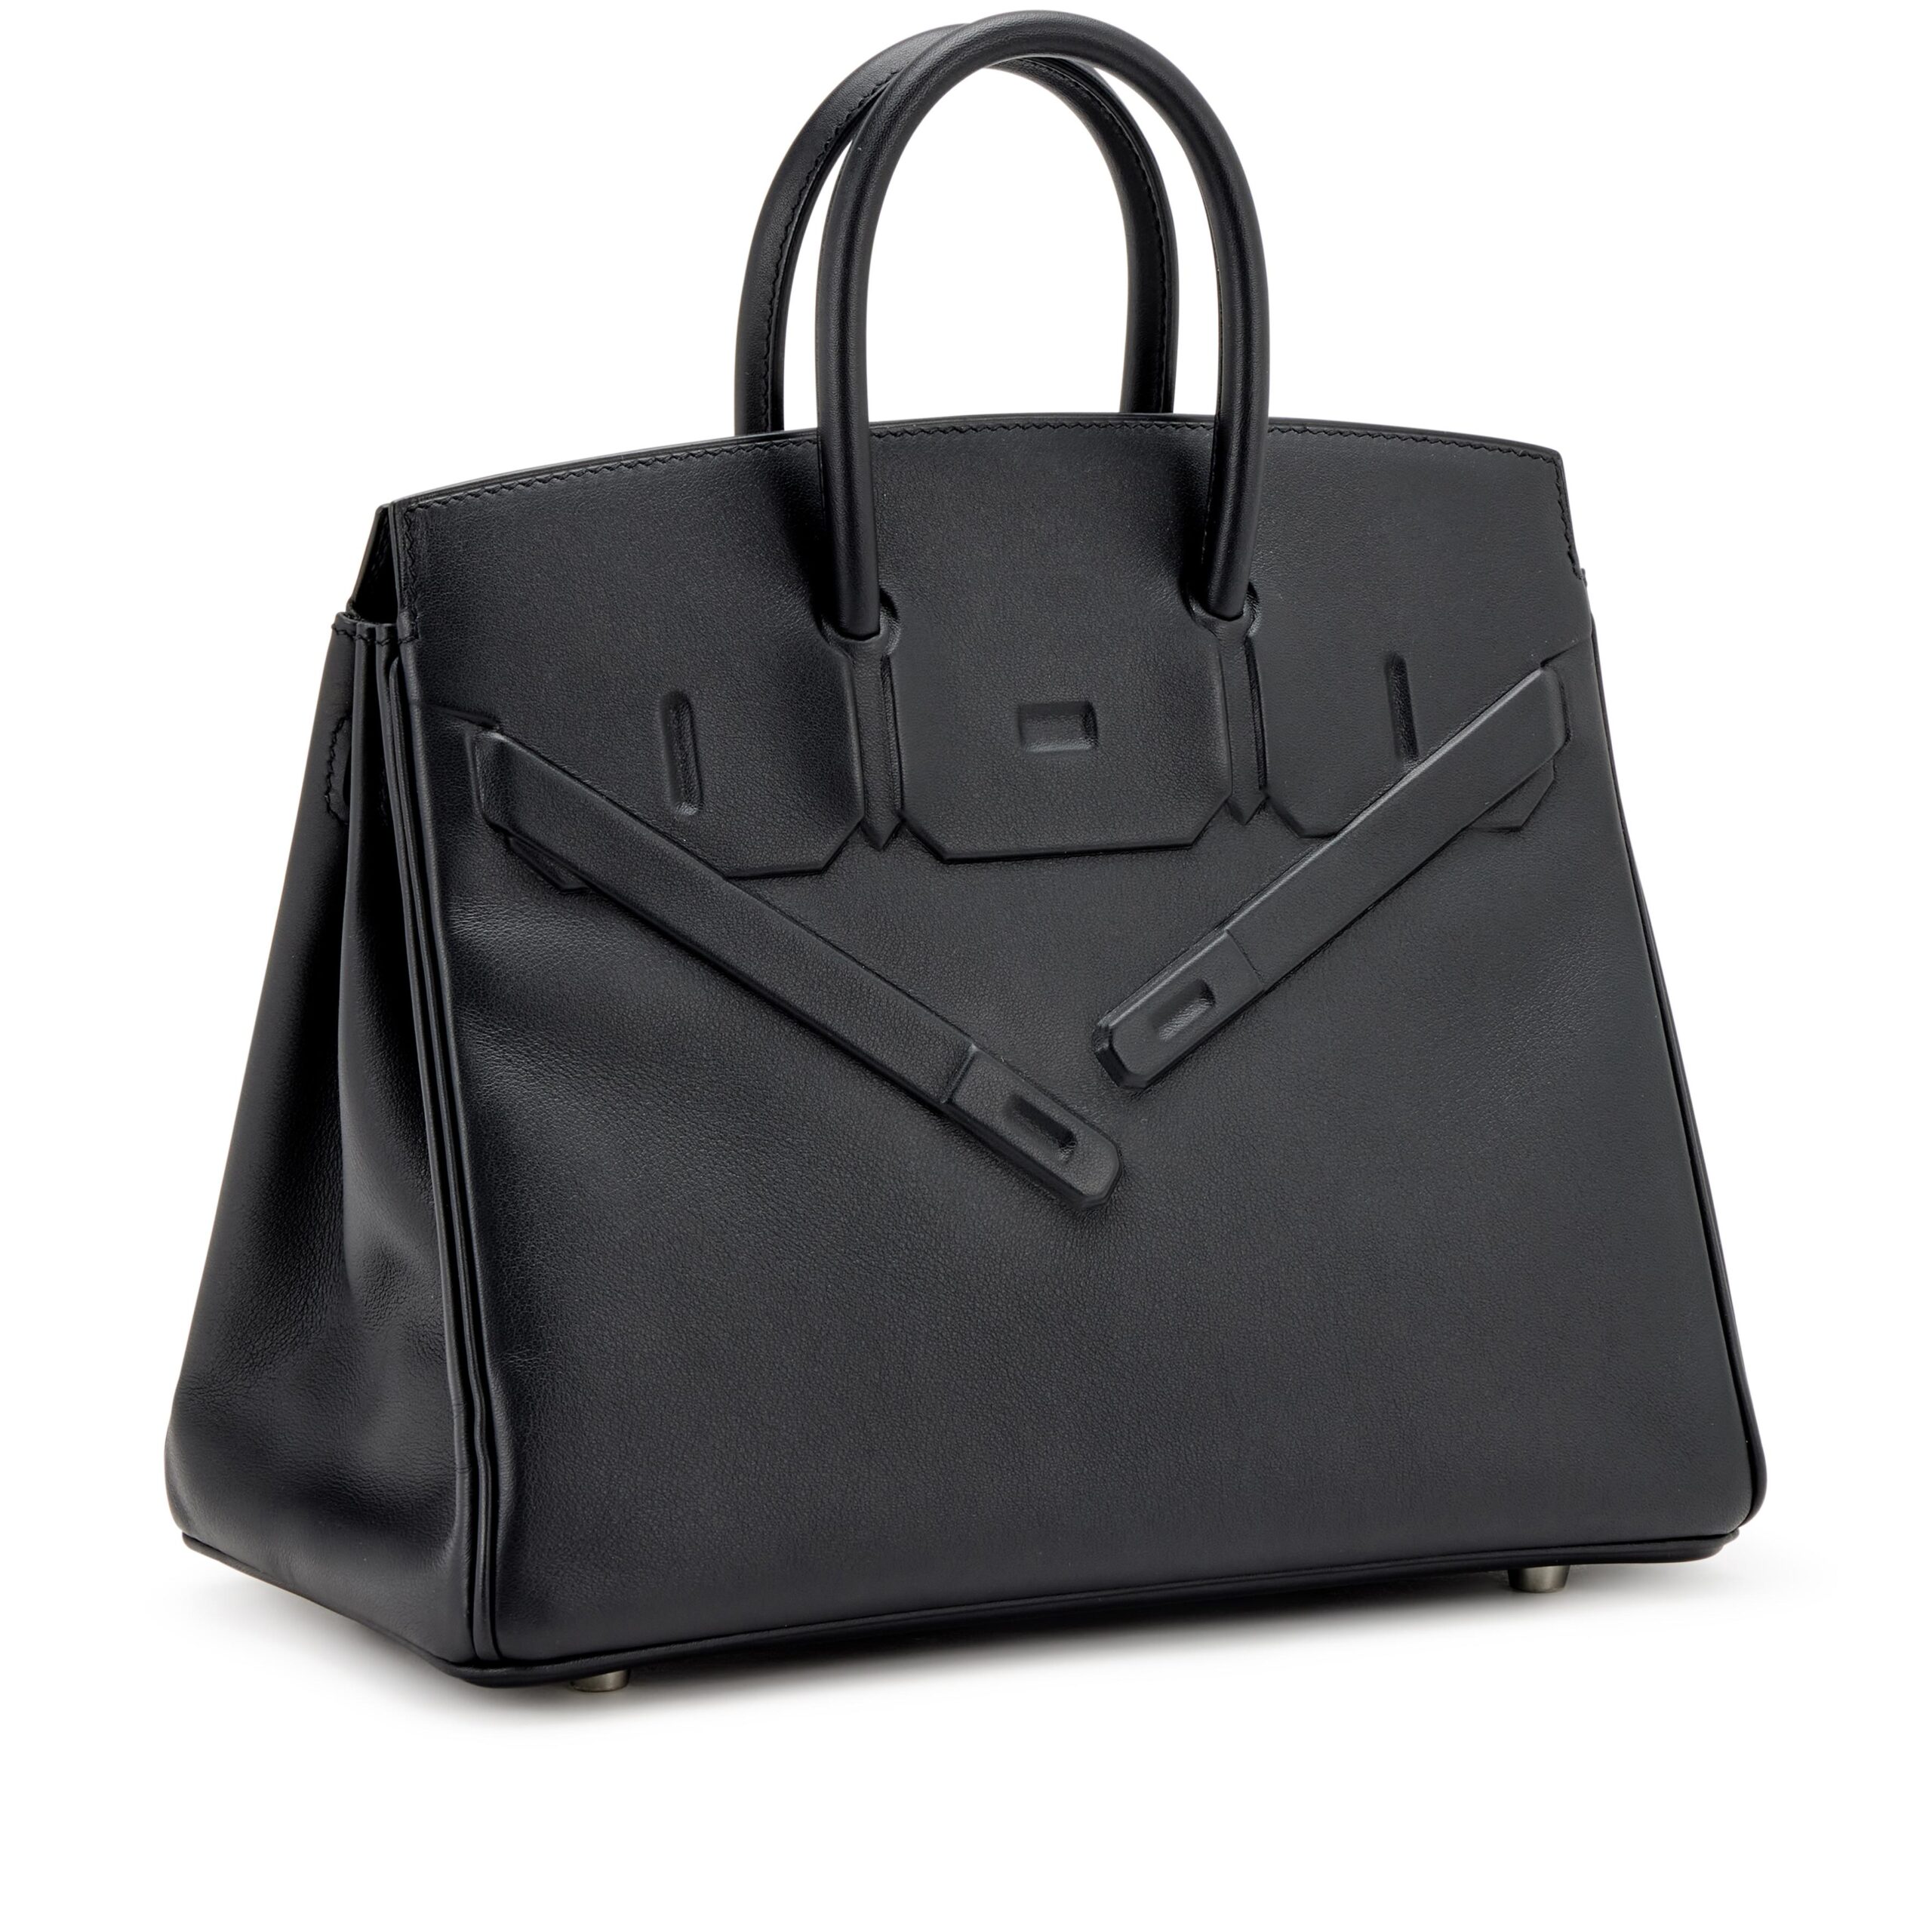 Hermès Birkin and Kelly Bags Lead Sotheby's Most Expensive